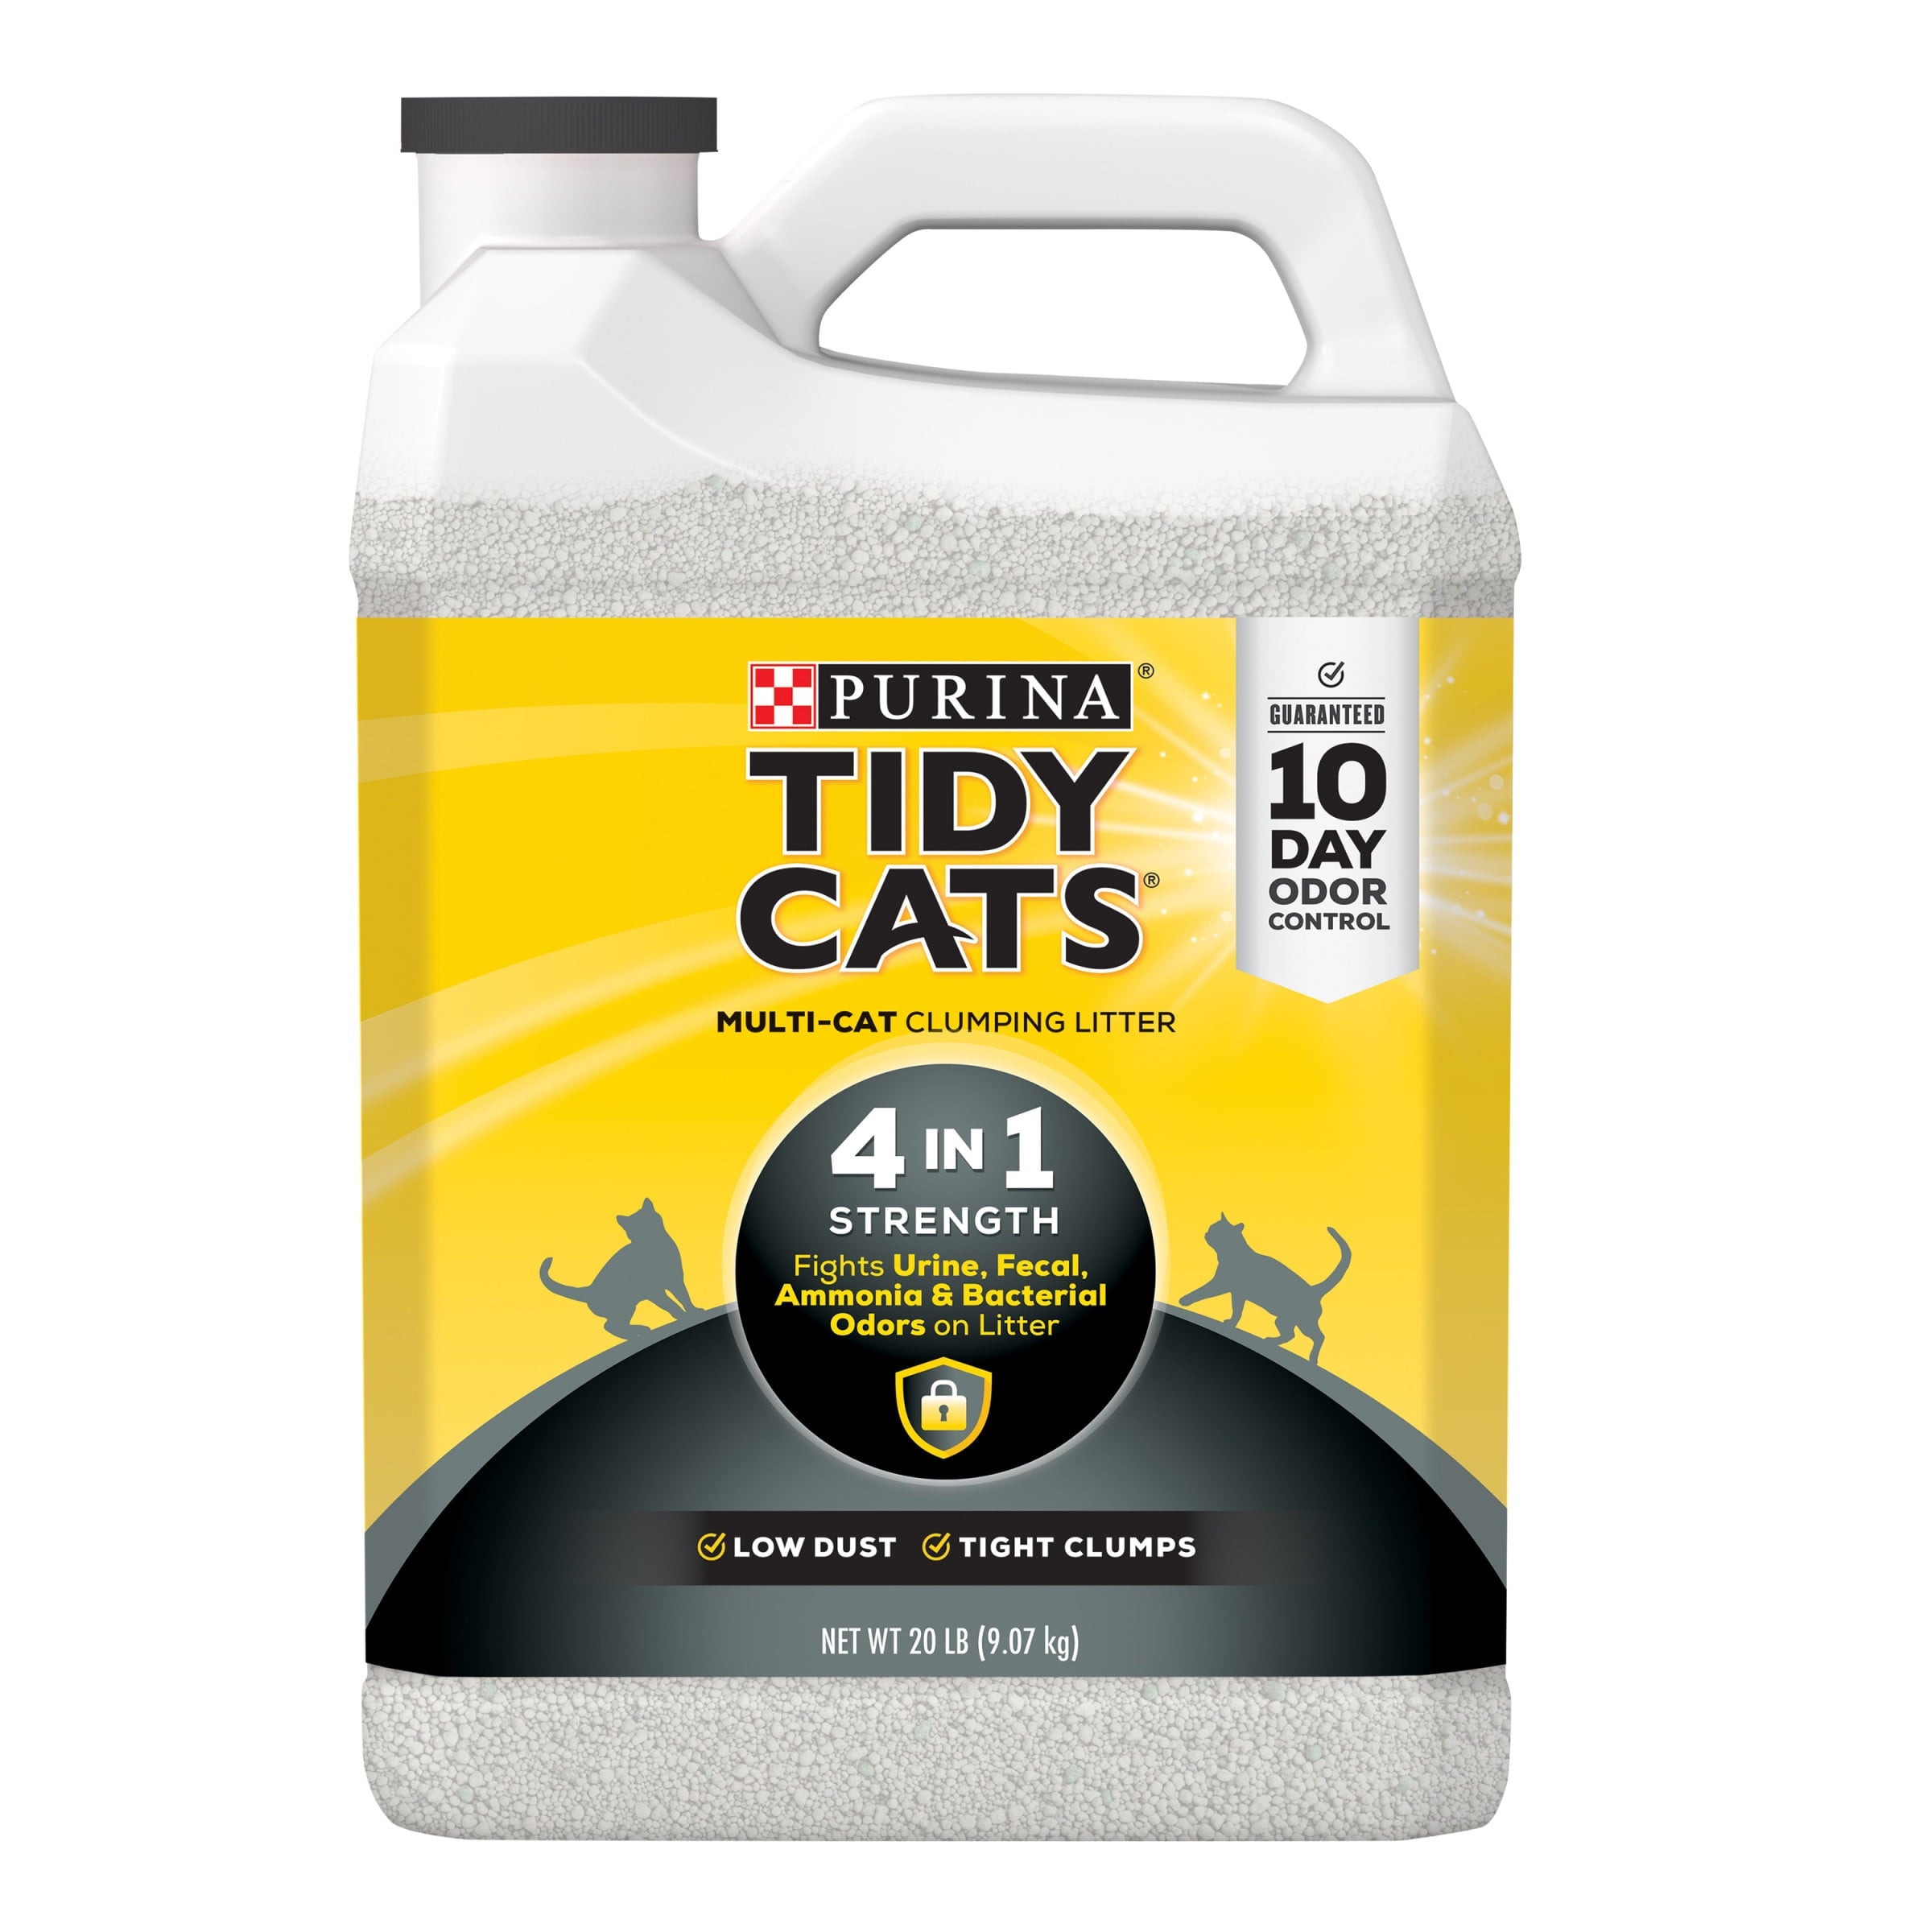 Wholesale prices with free shipping all over United States Purina Tidy Cats Clumping Cat Litter, 4-in-1 Strength Multi Cat Litter, 20 lb. Jug - Steven Deals